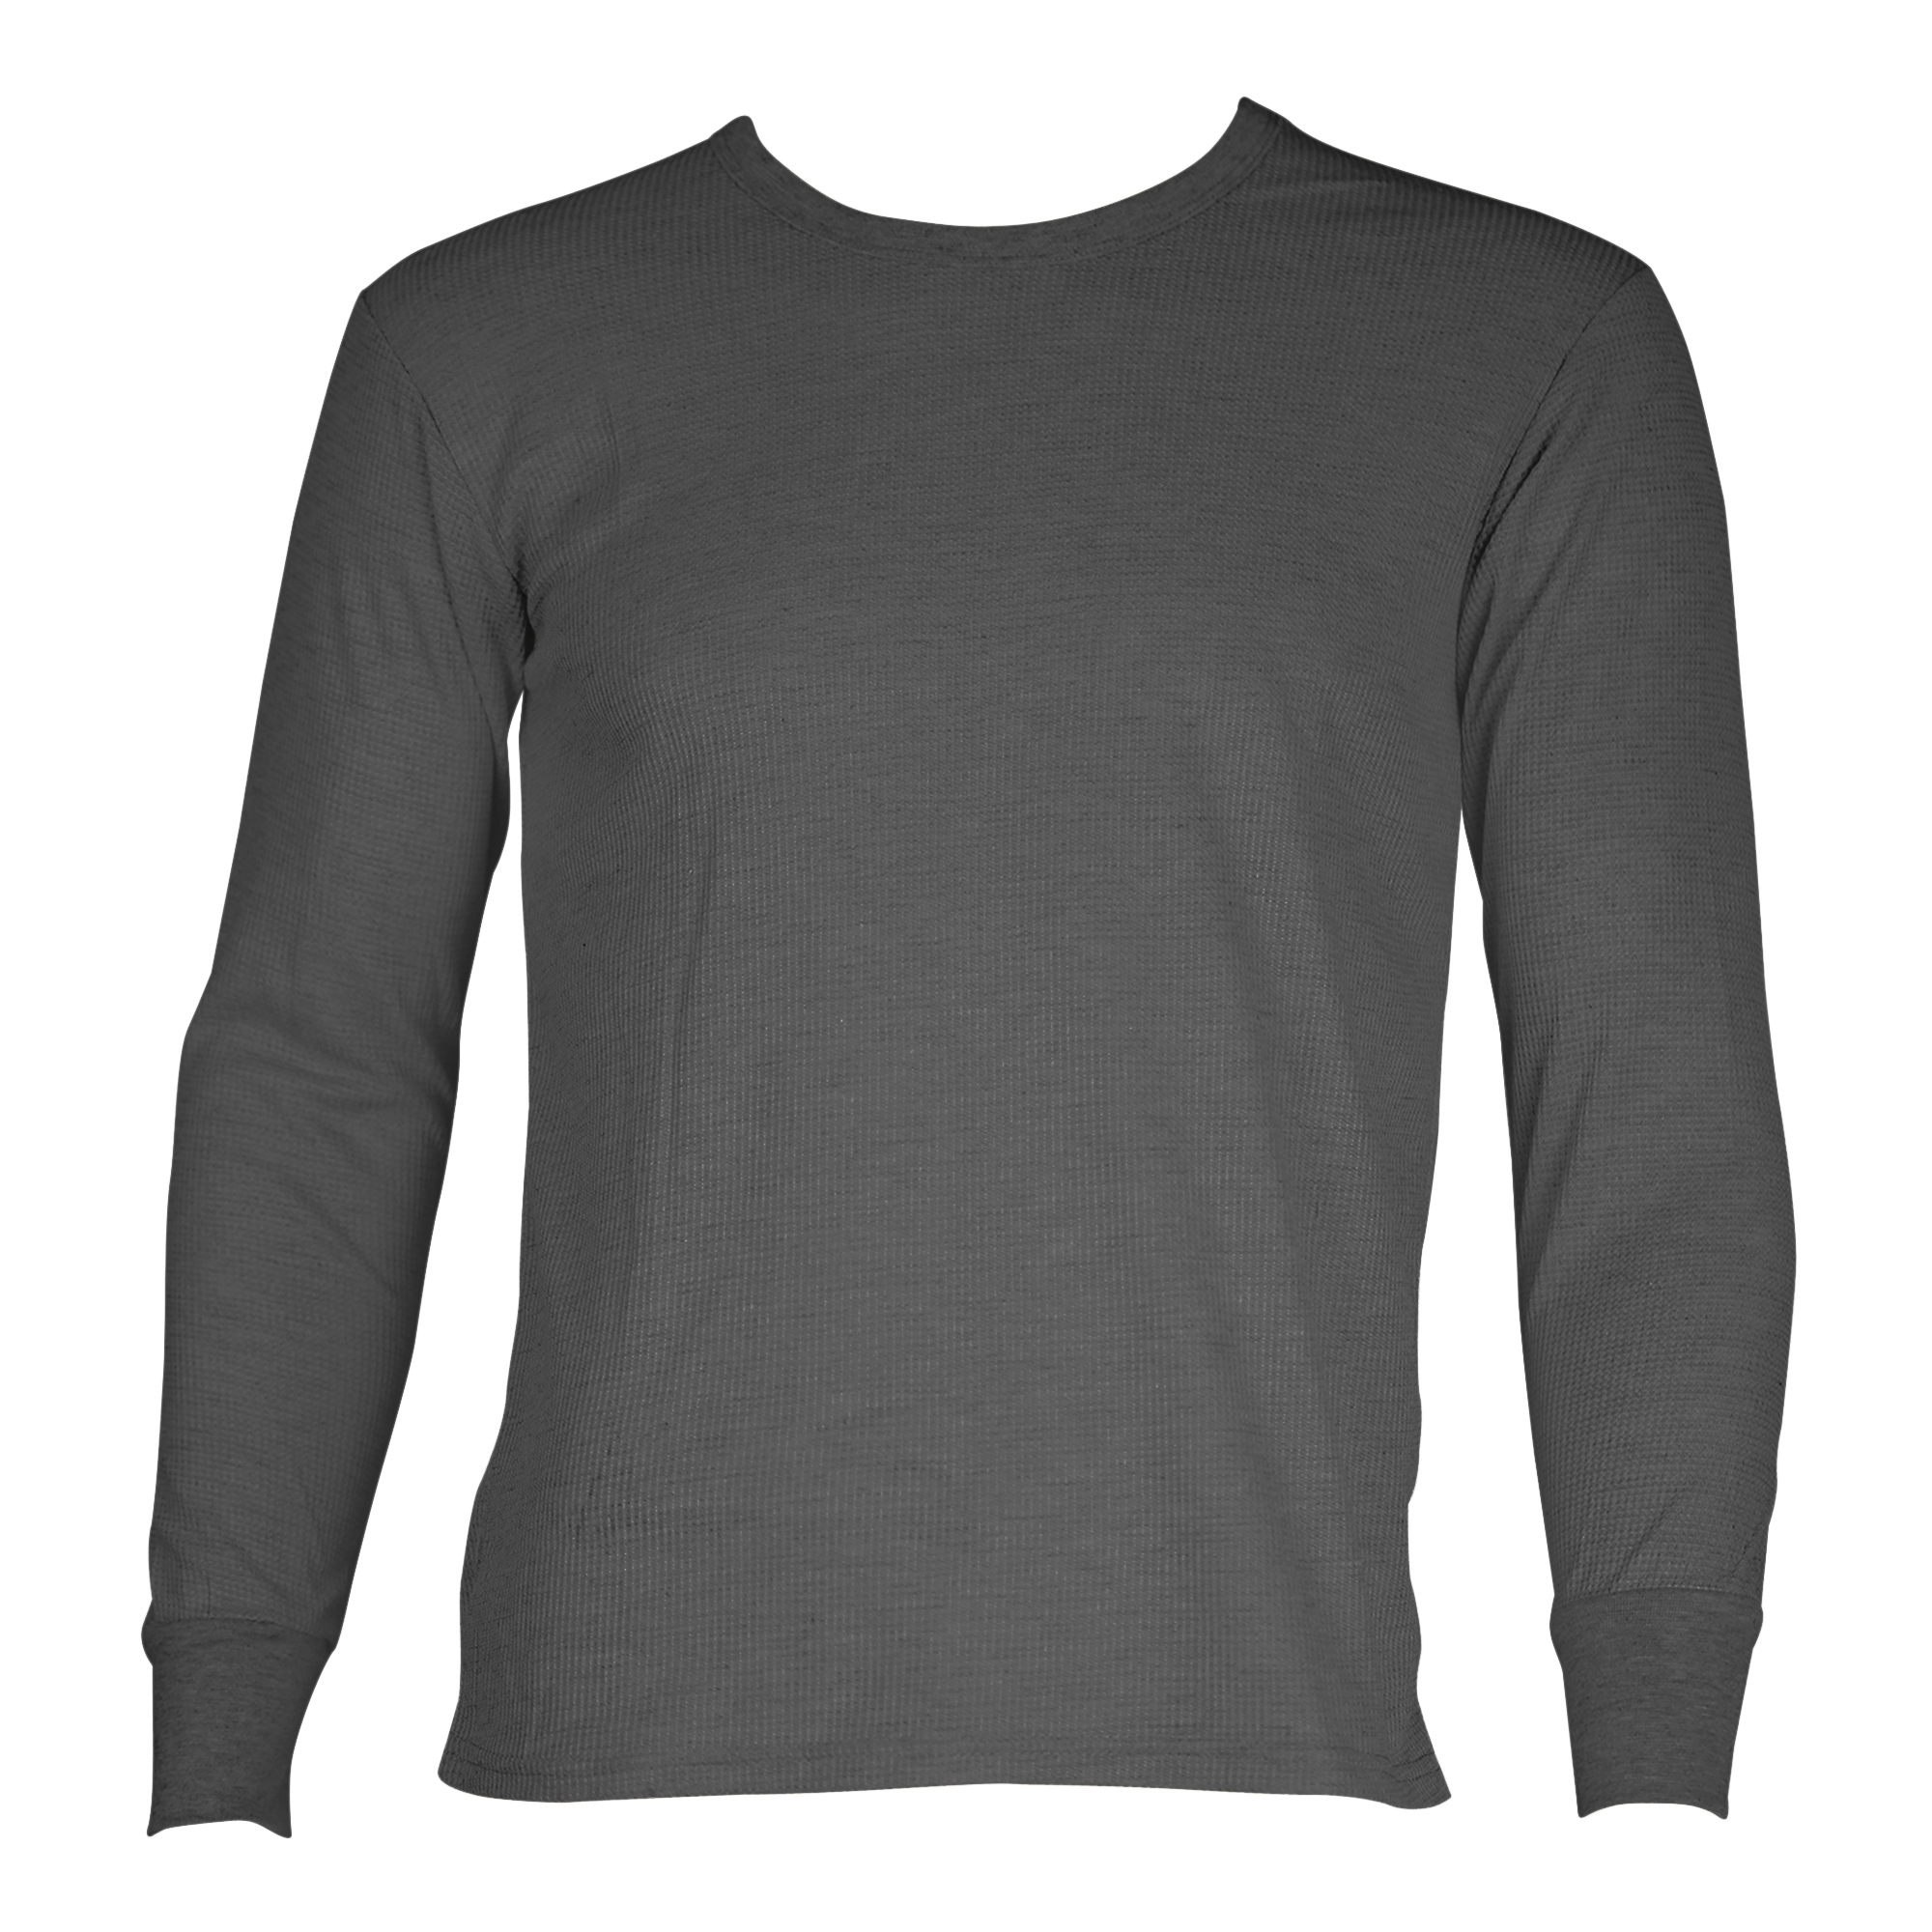 Mens 100% Cotton Thermal Top Warm Waffle Knit Long Sleeve Winter Henley ...